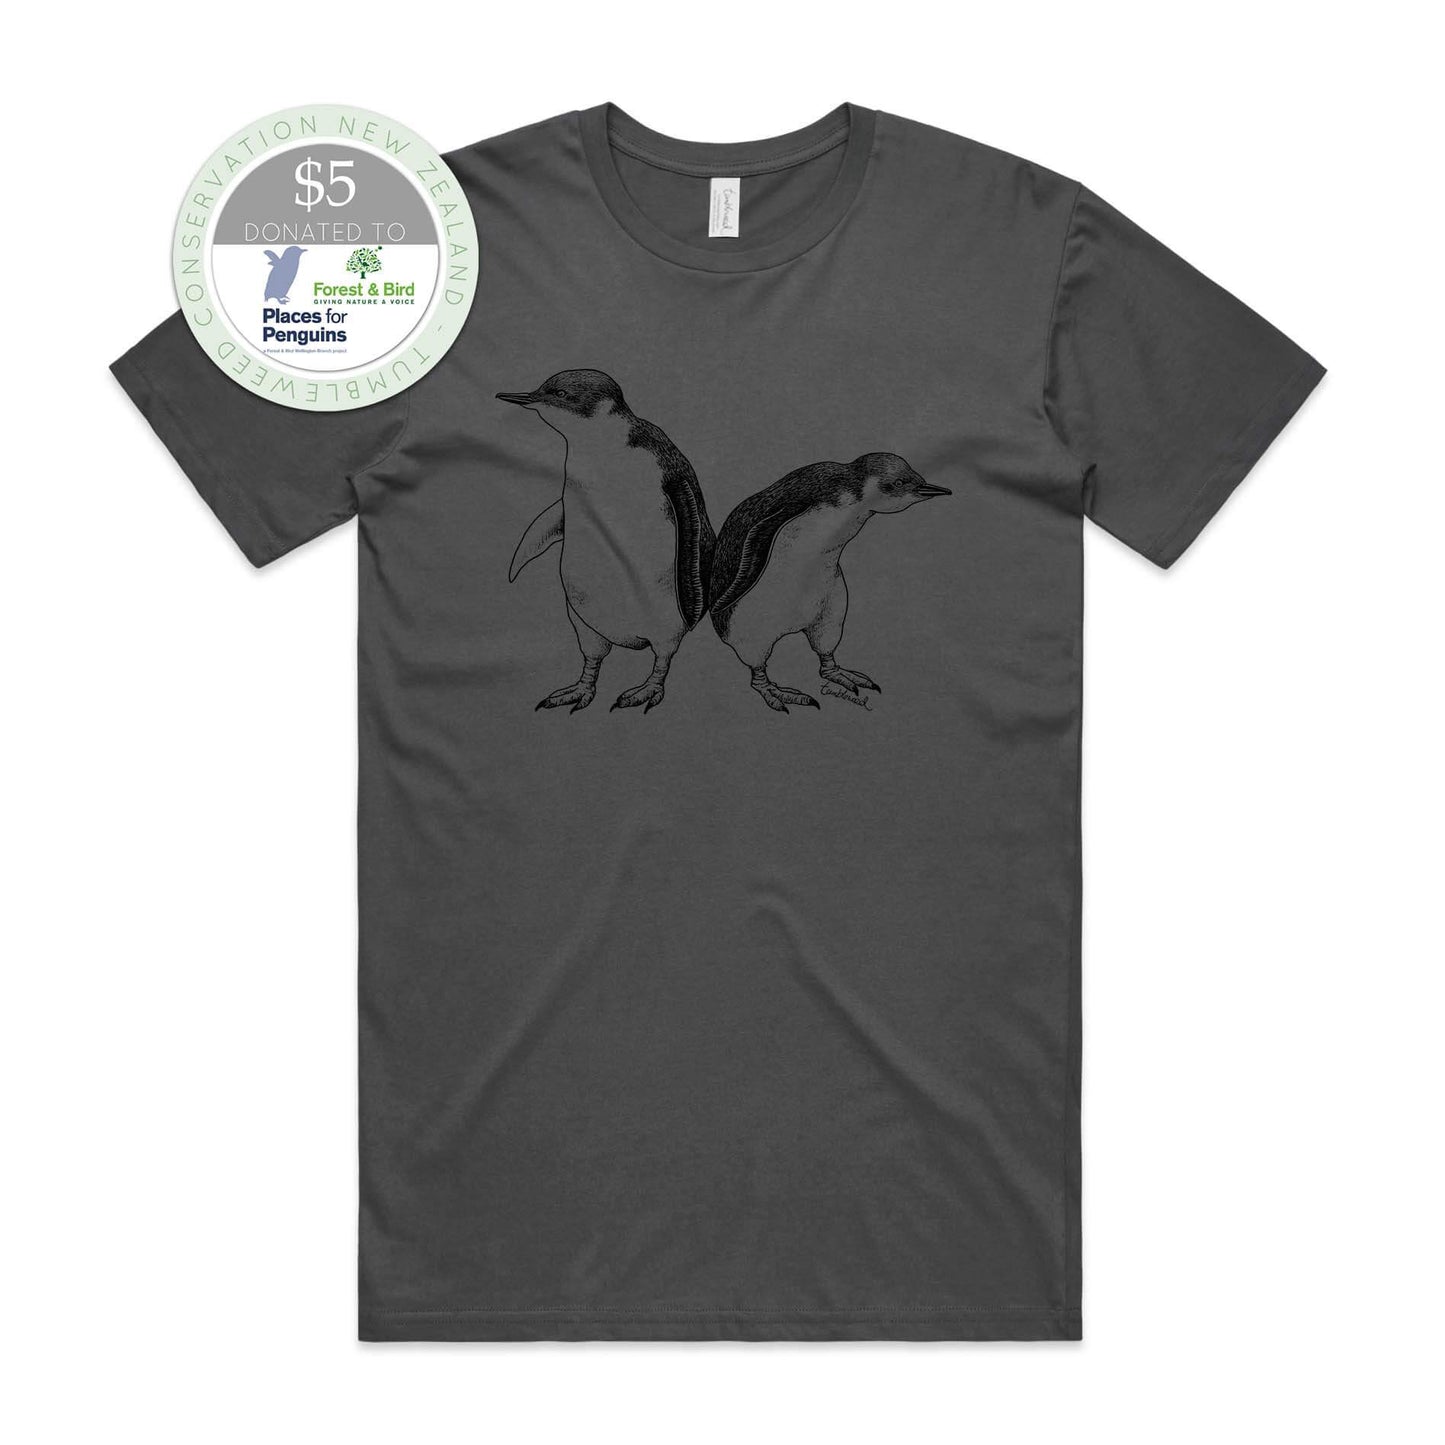 Charcoal, female t-shirt featuring a screen printed Little Blue Penguin design.